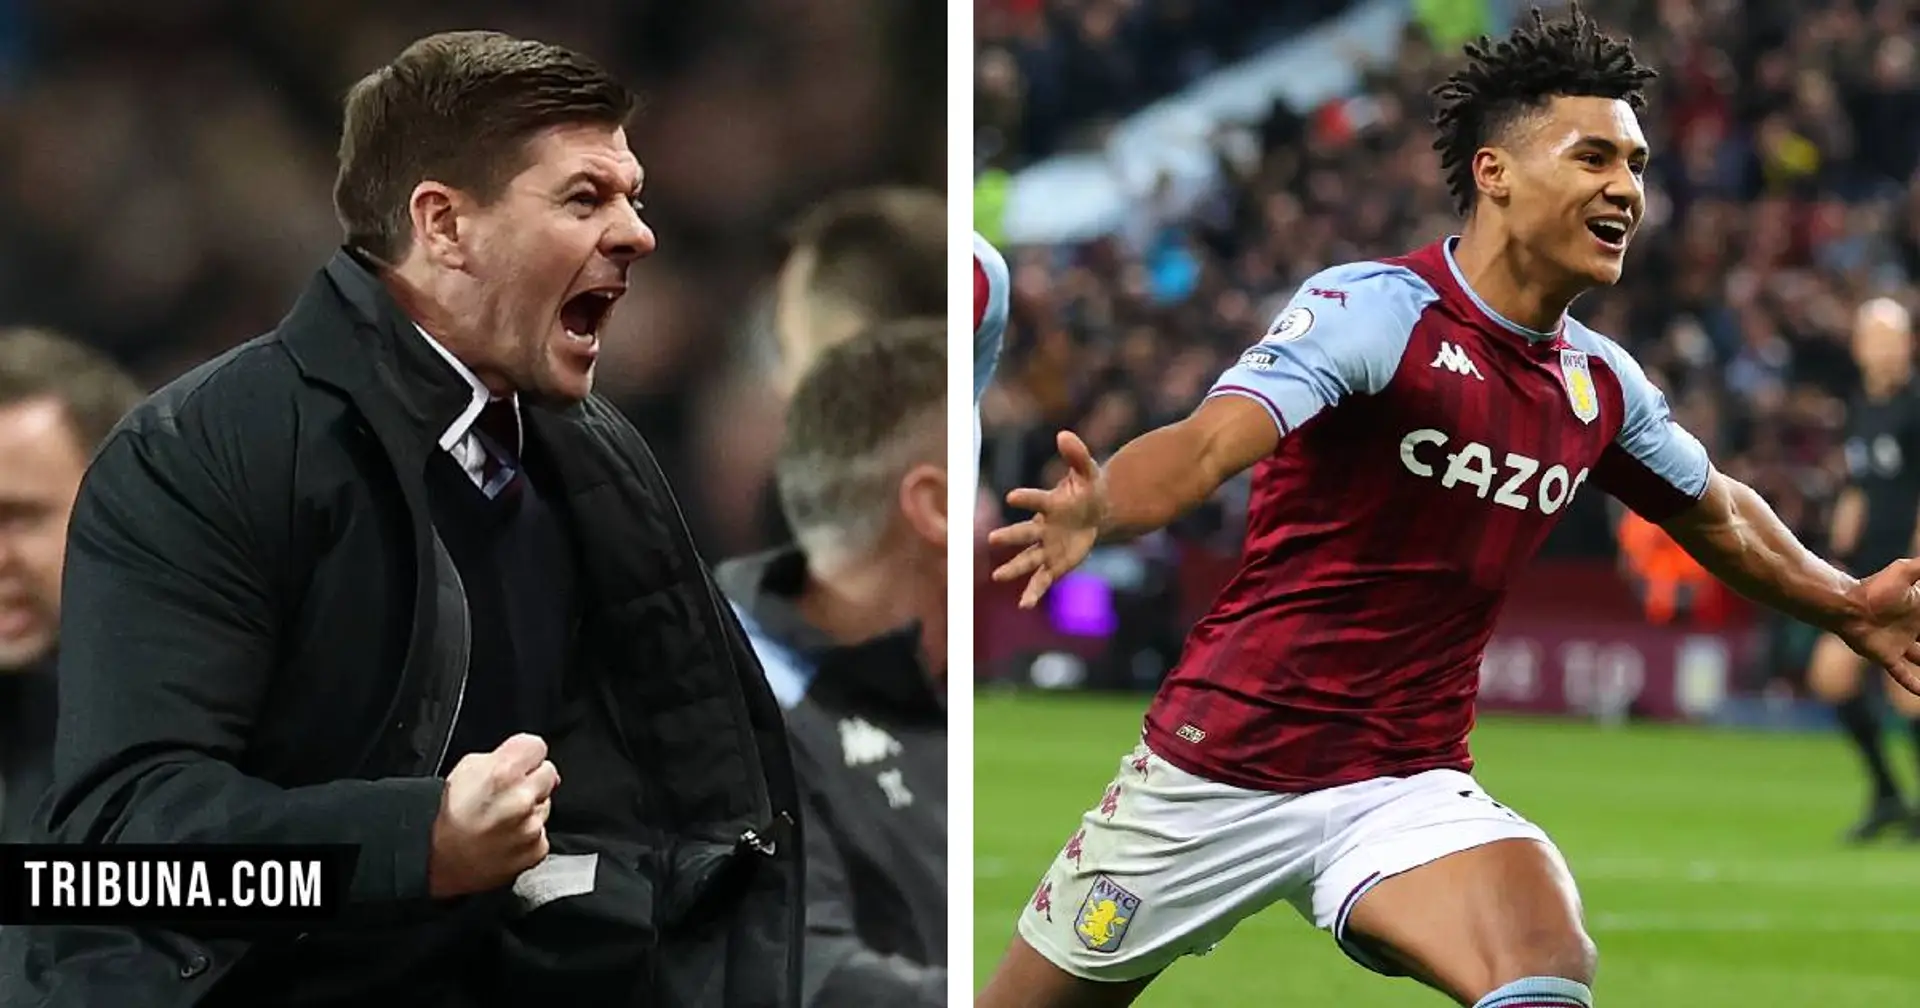 Gerrard leads Villa to 2-0 win over Brighton his first game in charge